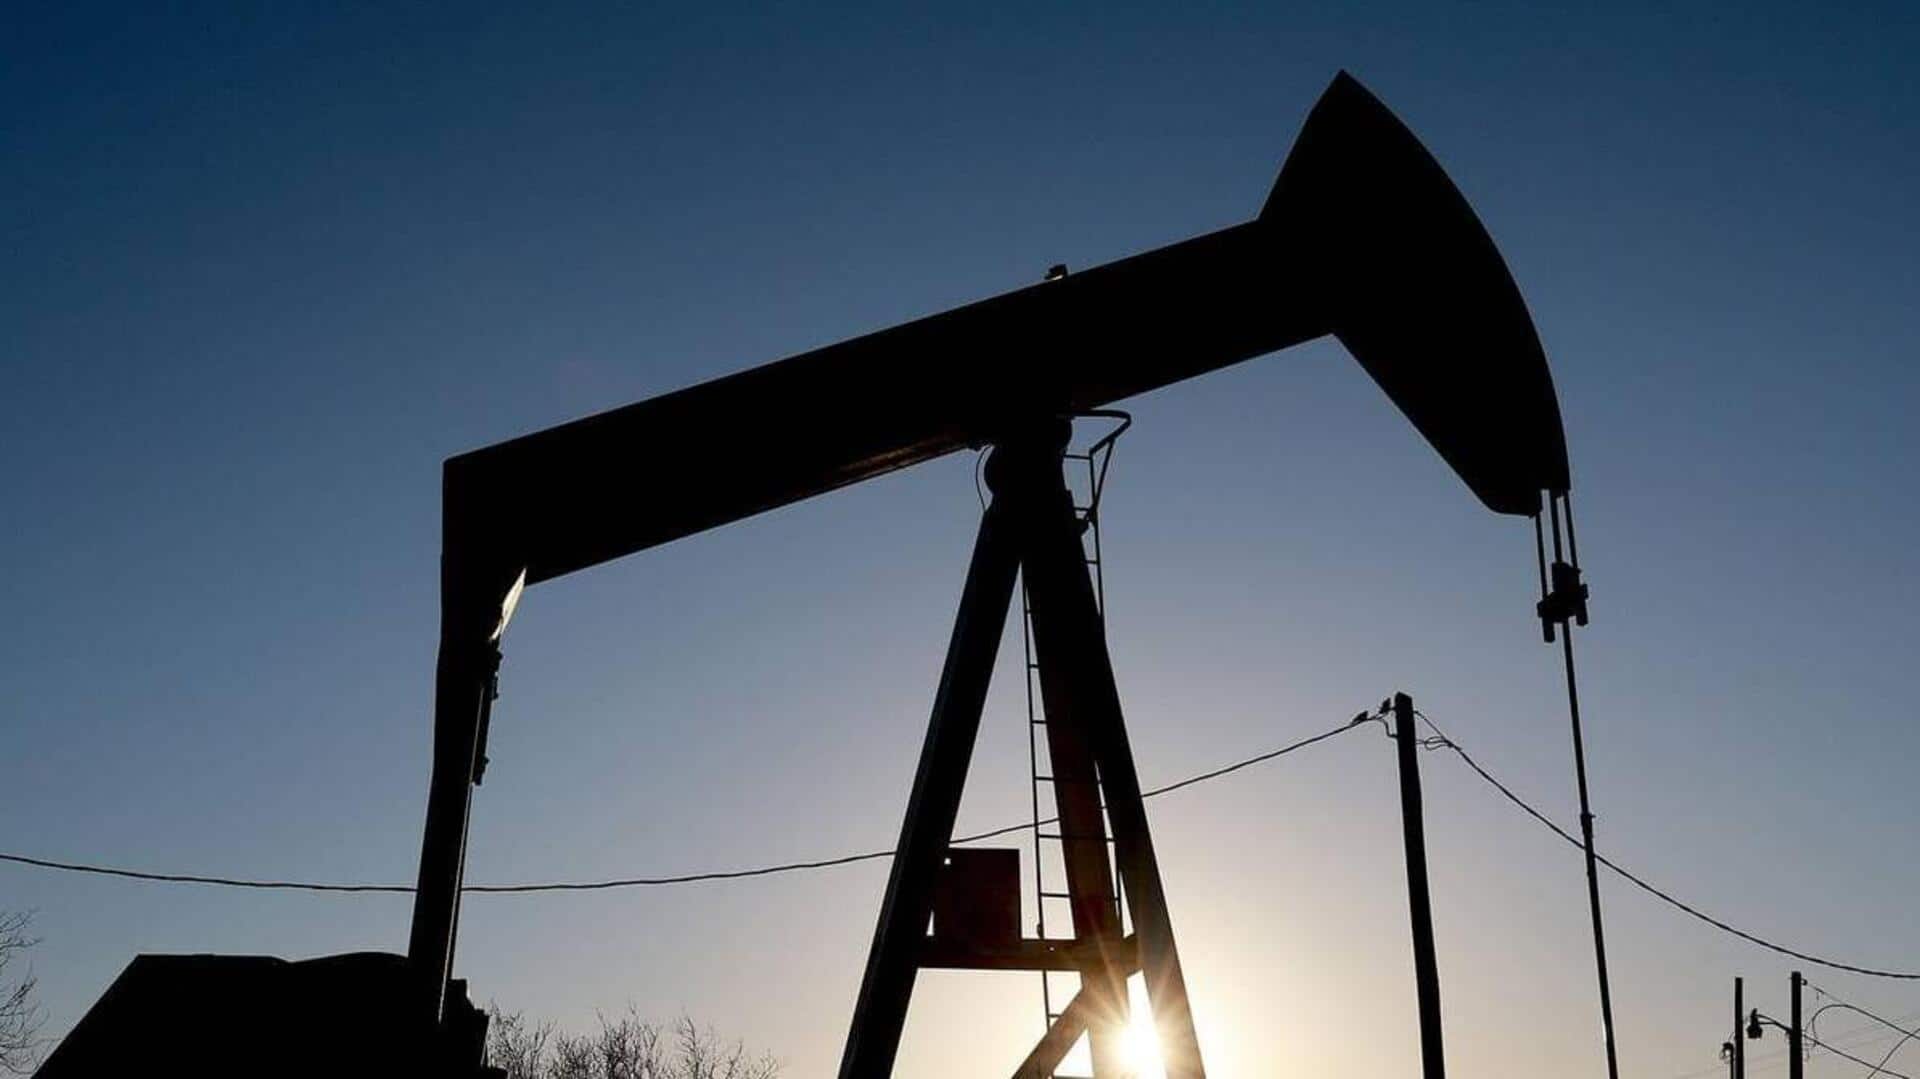 Oil prices face 7th consecutive weekly decline: Here's why